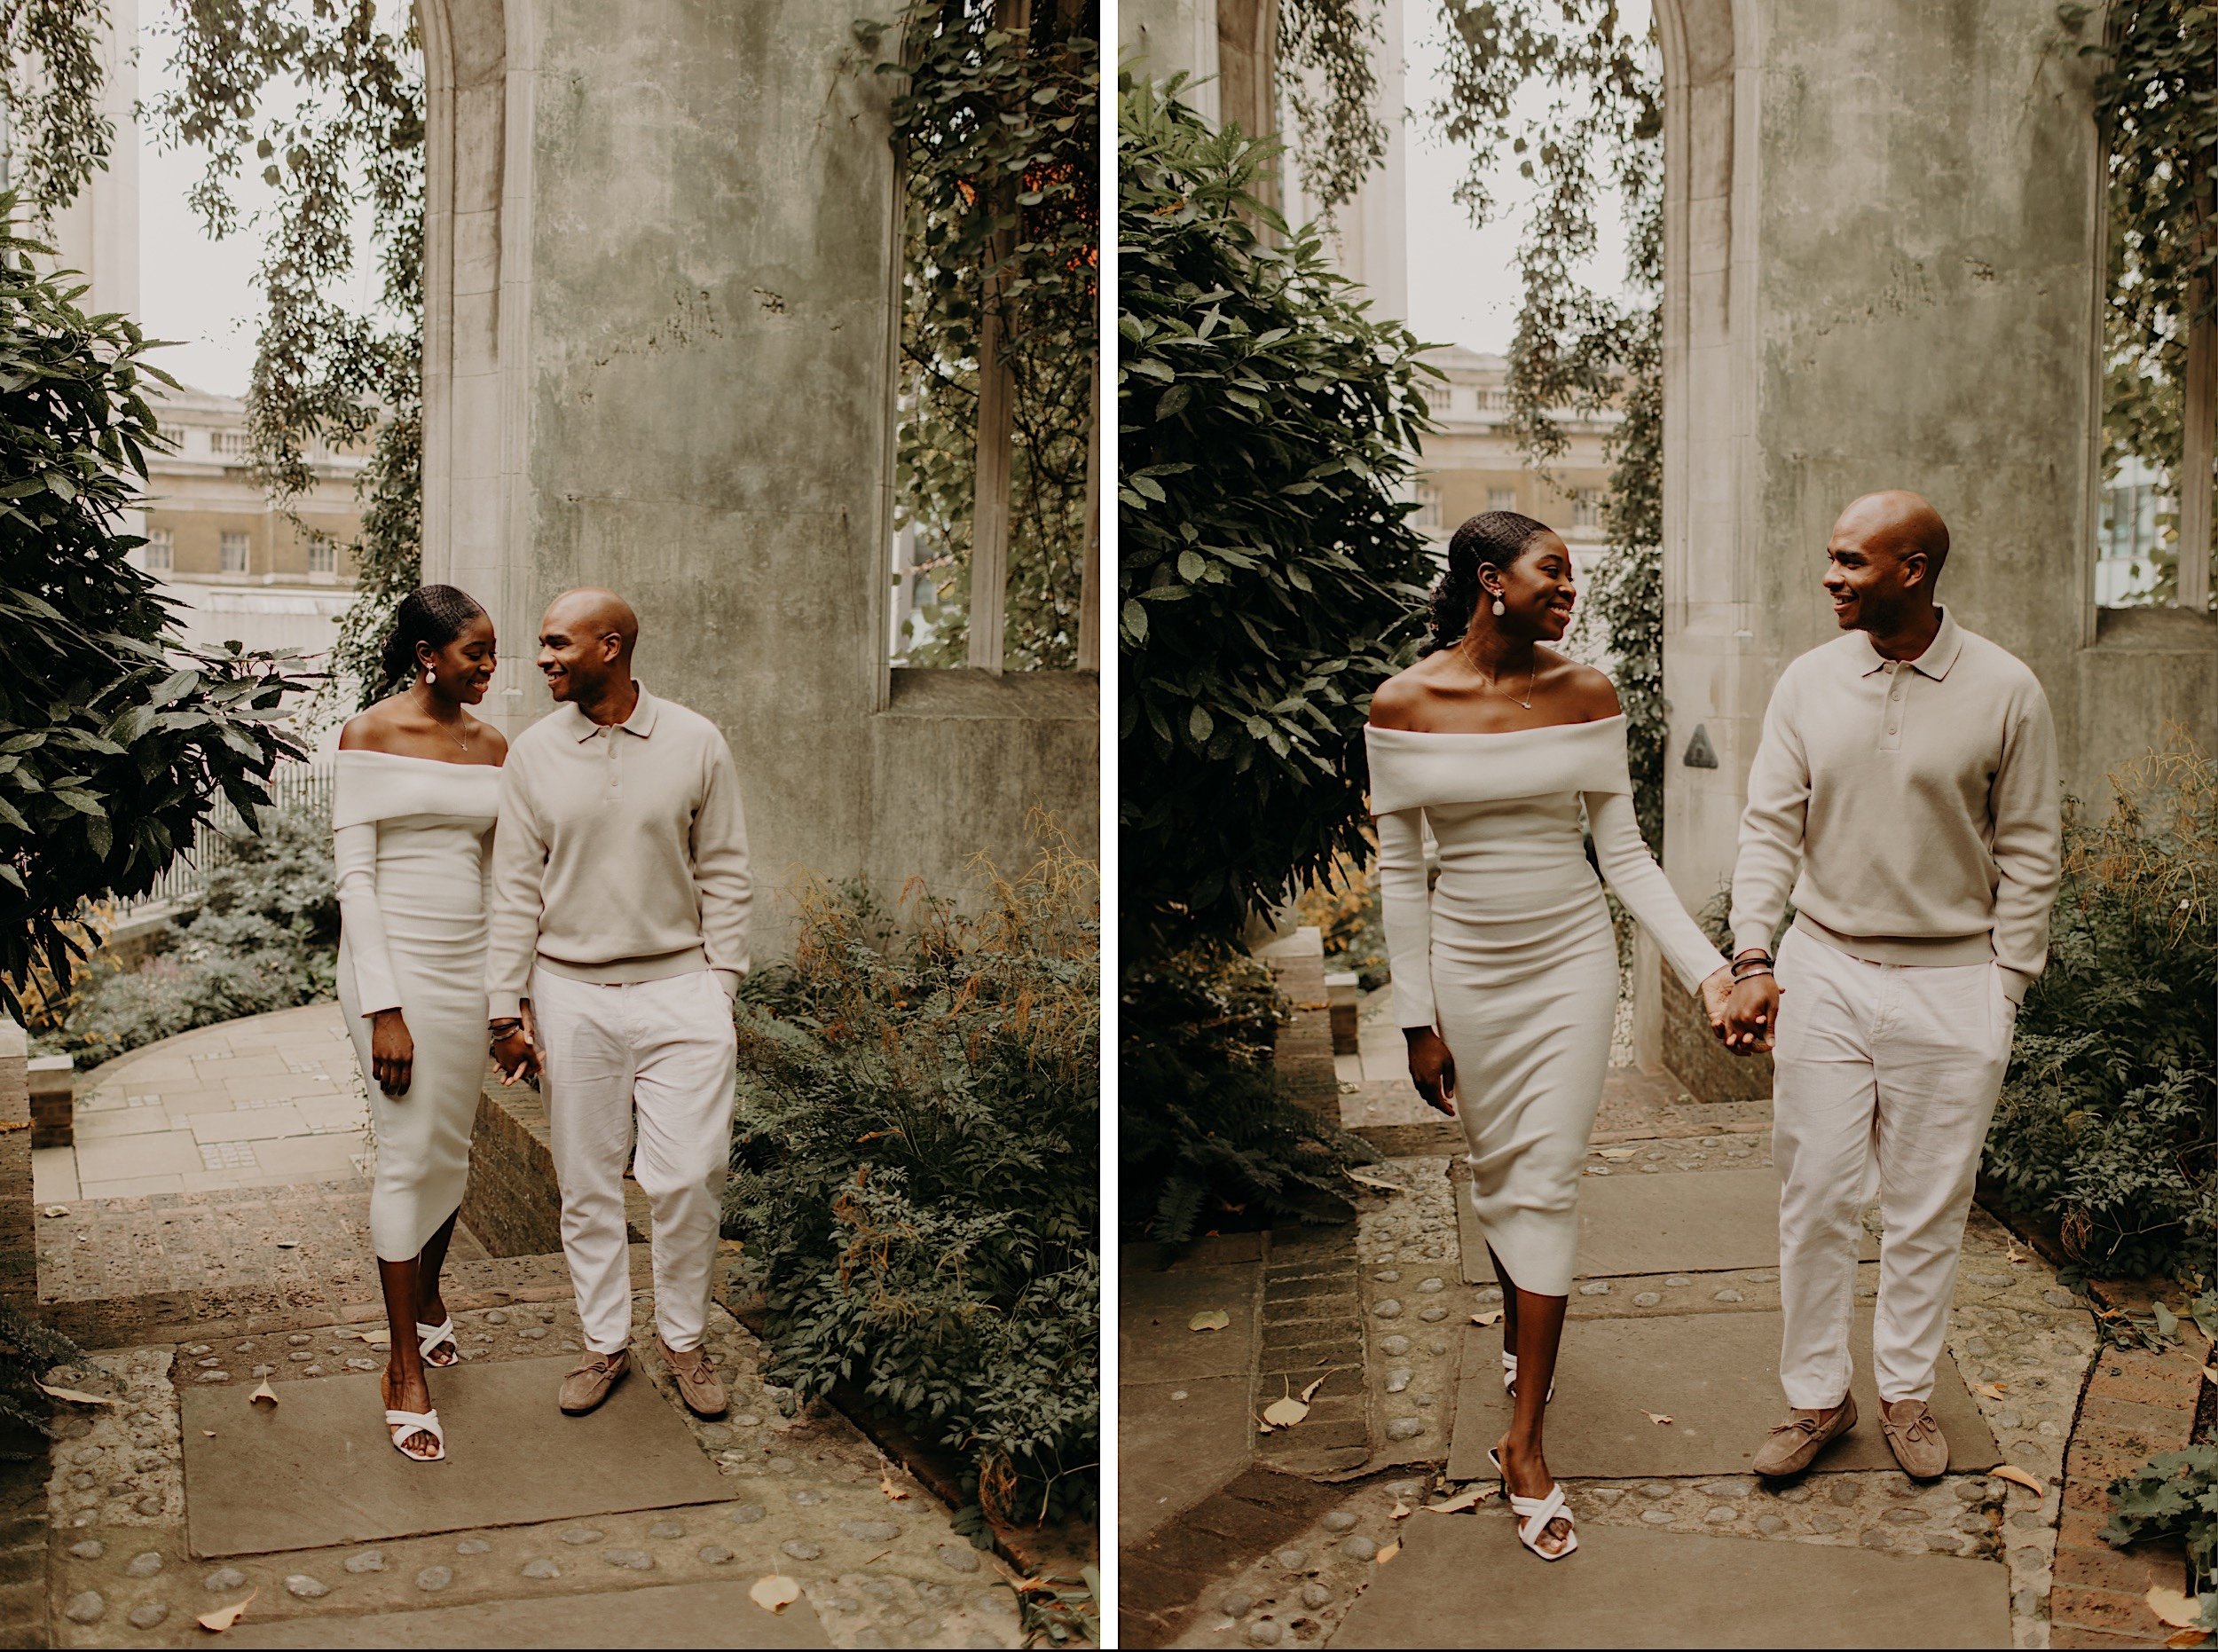 01_St-Dunstans-in-the-east-pre-wedding-shoot0002_St-Dunstans-in-the-east-pre-wedding-shoot0001_Gorgeous black model couple in love walk through st dunstan in the east.jpg